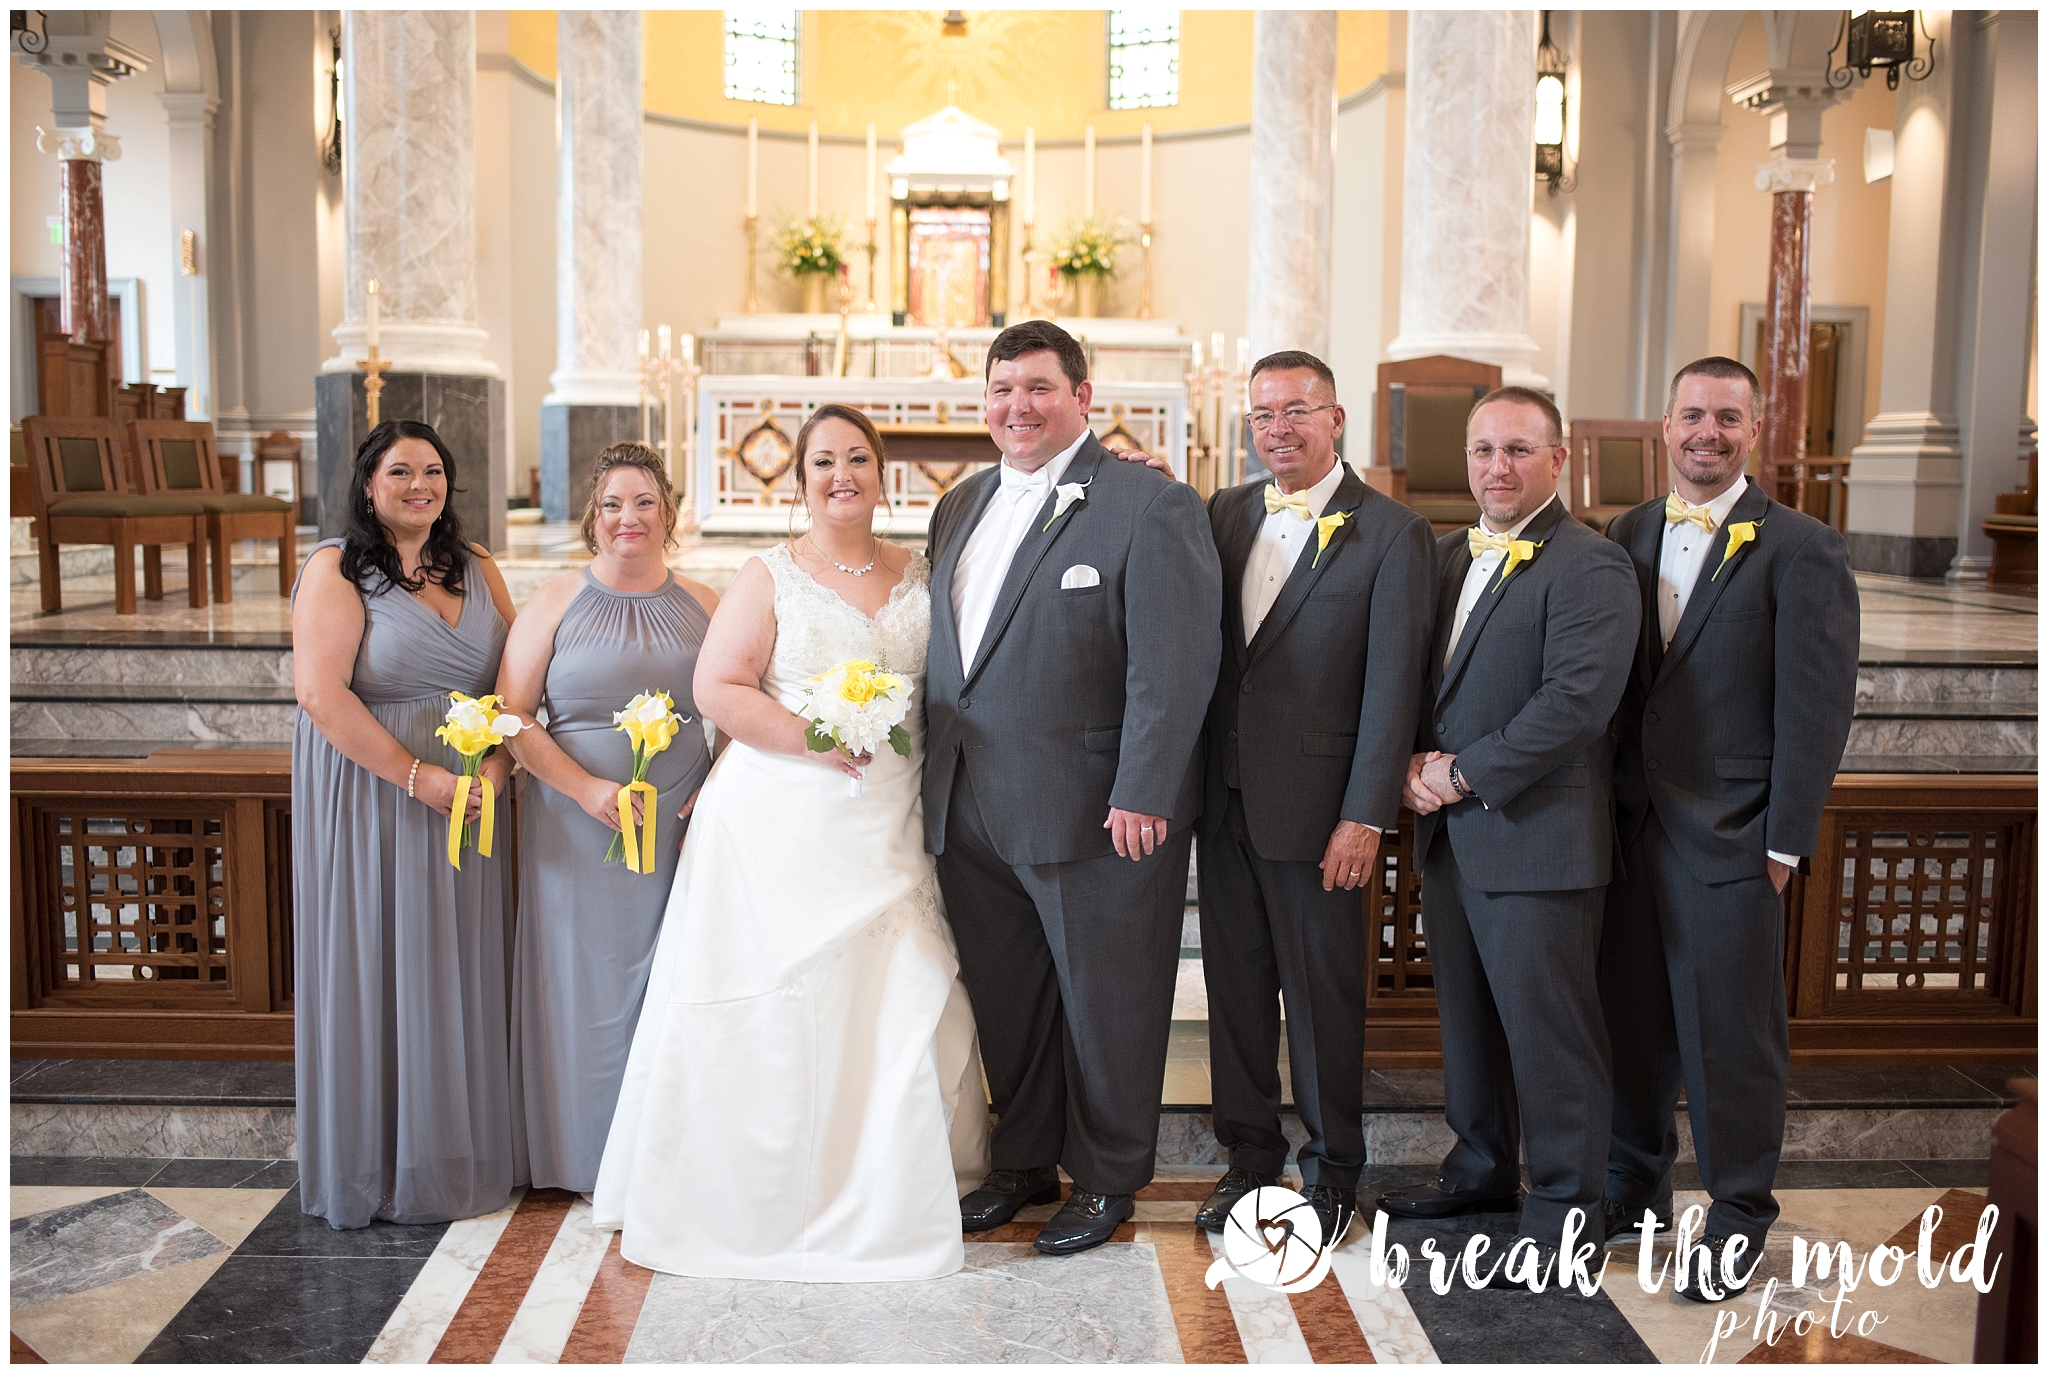 wedding-knoxville-sacred-heart-cathedral-photographer-break-the-mold-photo-feature-affordable_0807.jpg